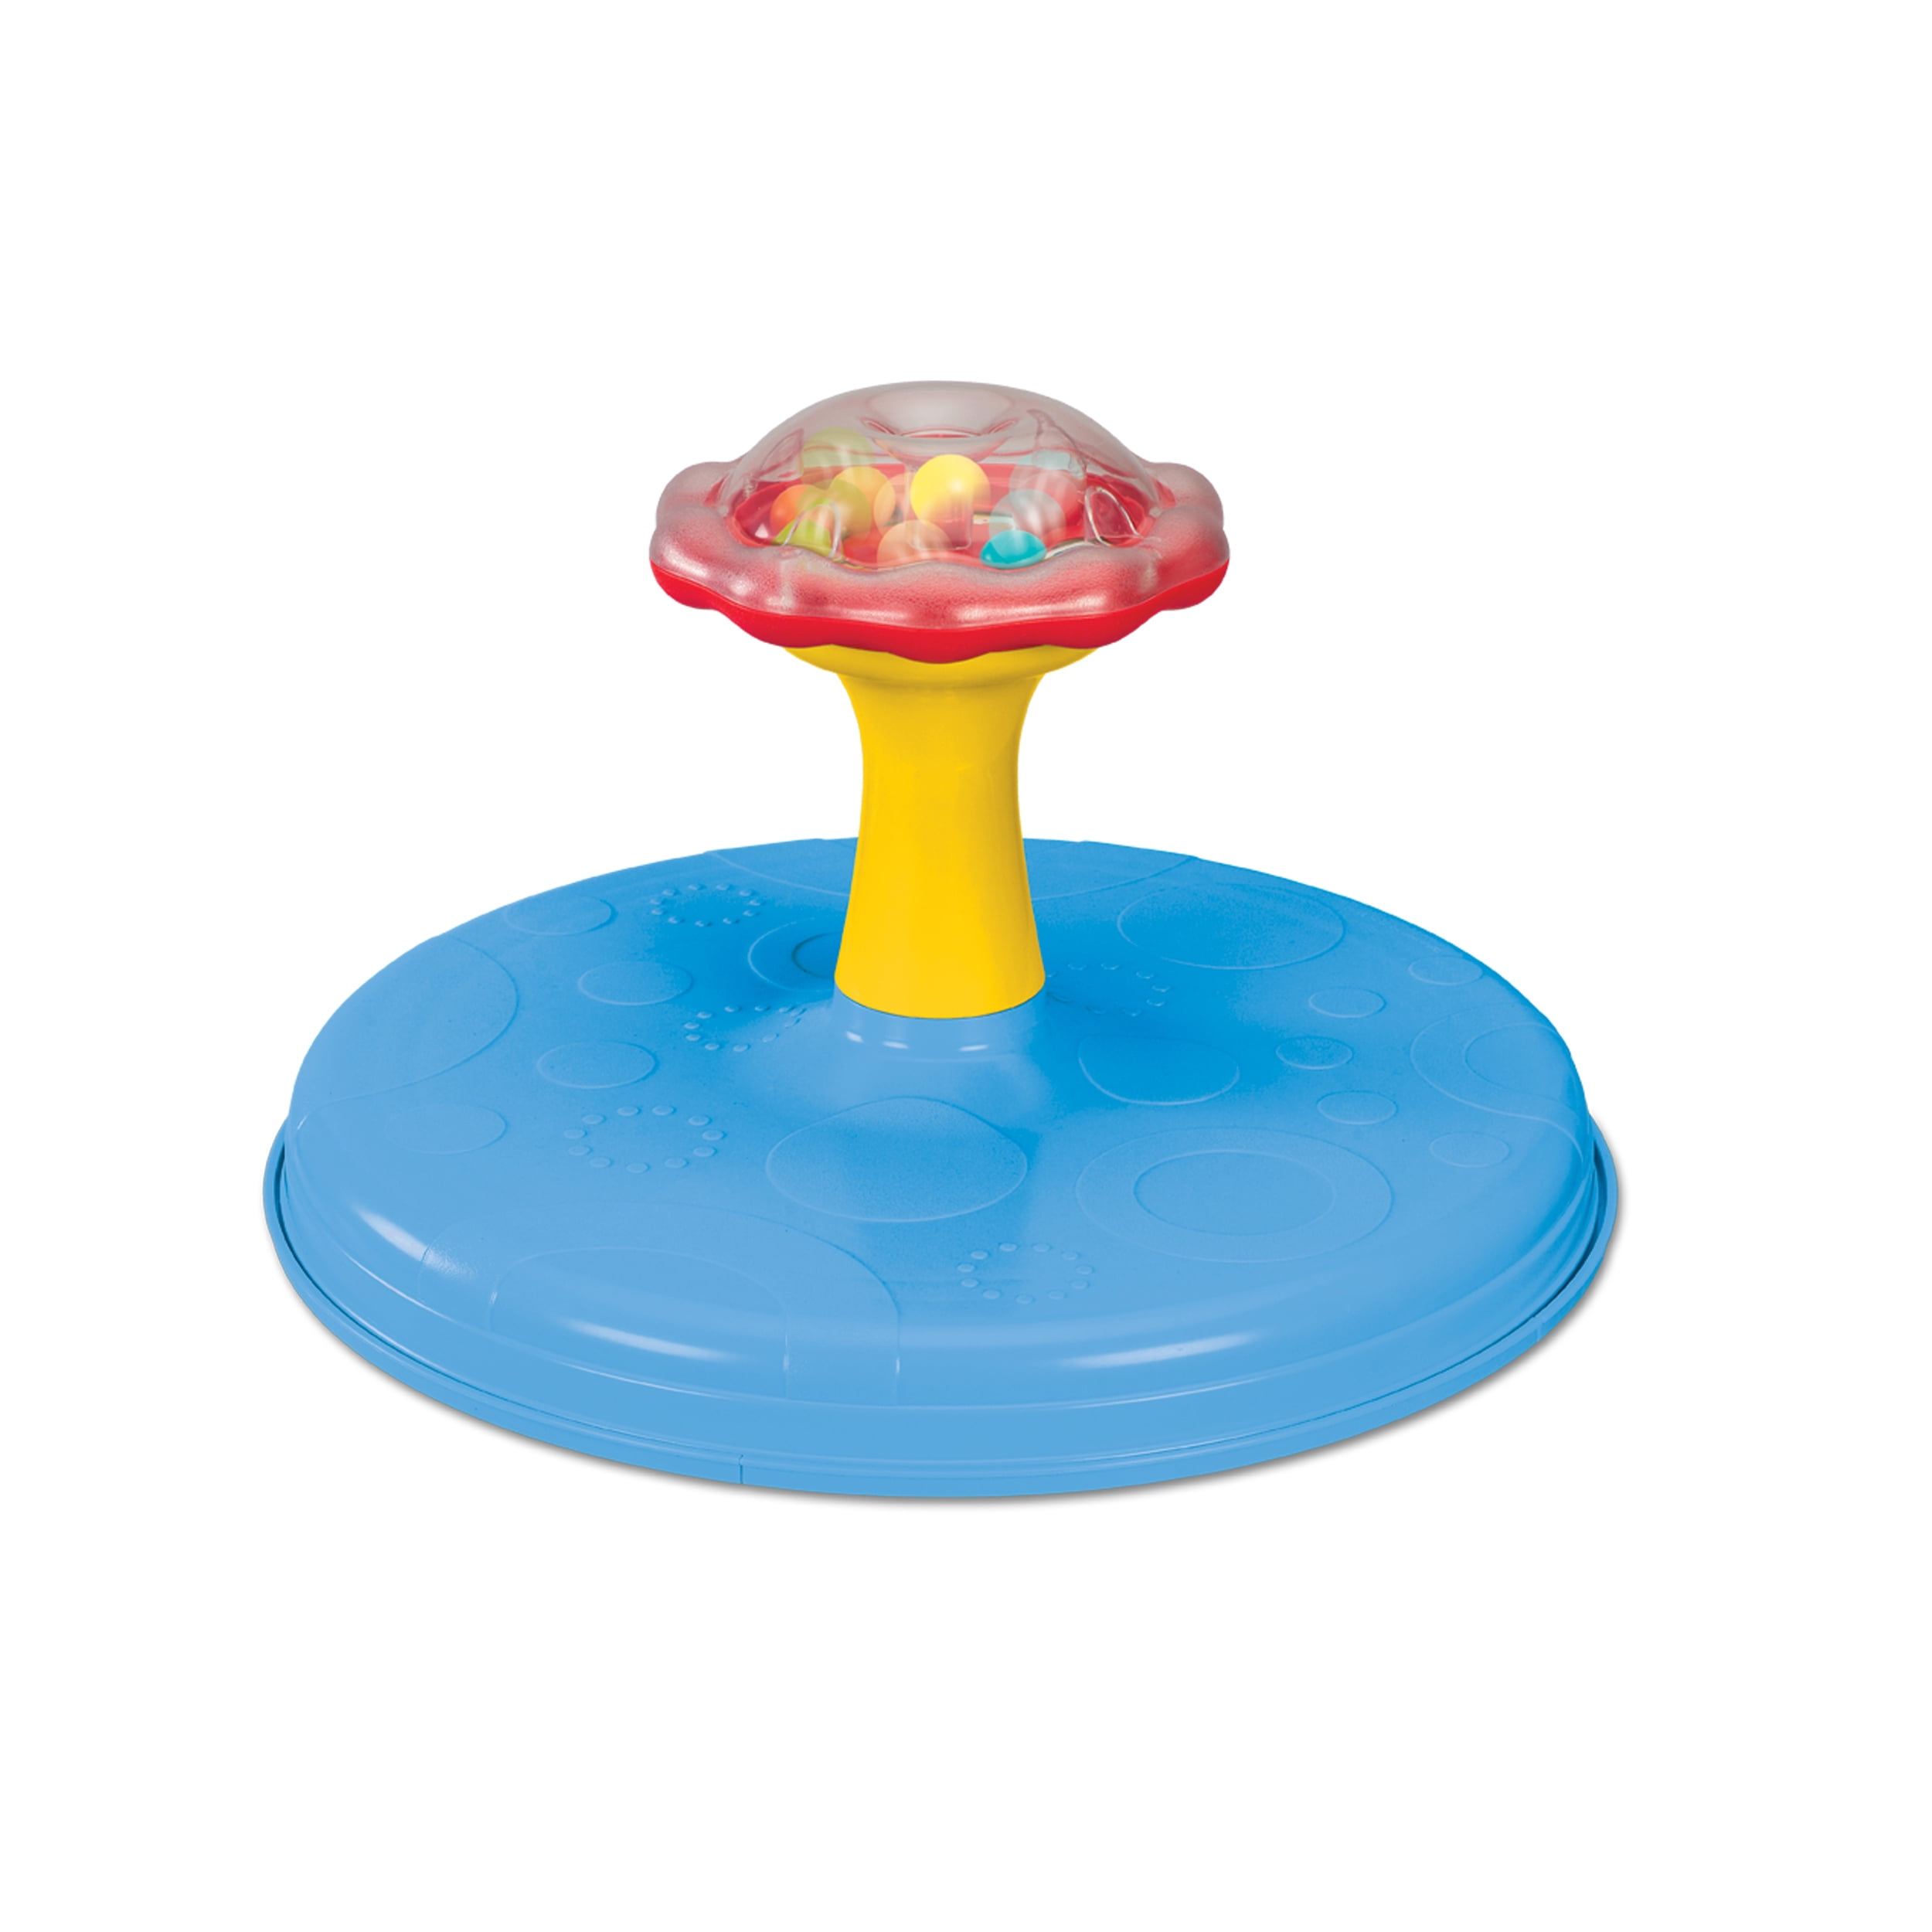 Grow'n up Multi-Color Twirl 'n Whirl Go-Round for Ages 18 to 36 Months 